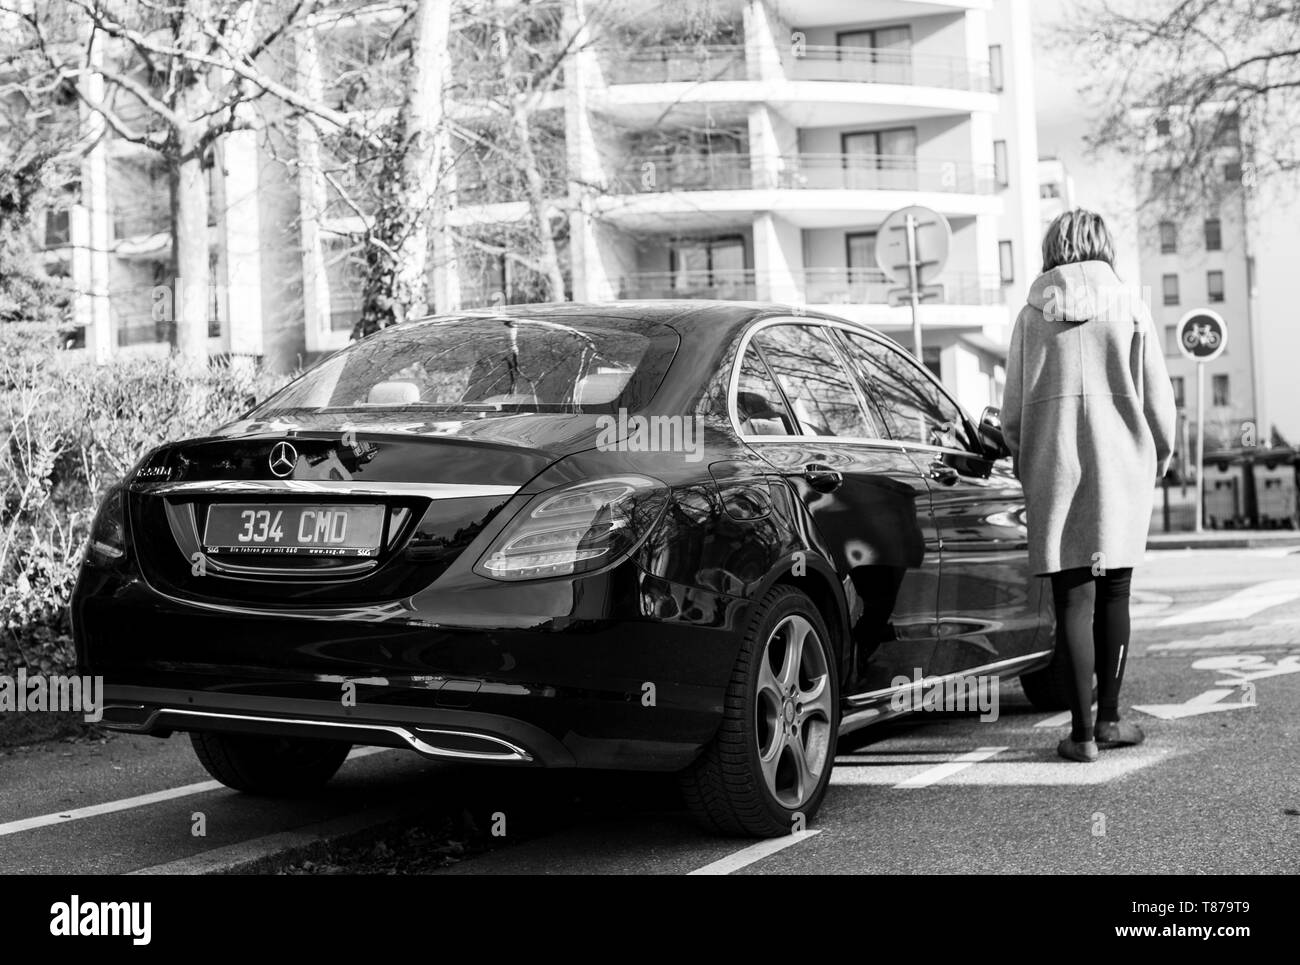 Strasbourg, France - Feb 23, 2017: Woman walking toward luxury Mercedes-Benz E220d diesel car parked on a calm street in French city black and white Stock Photo